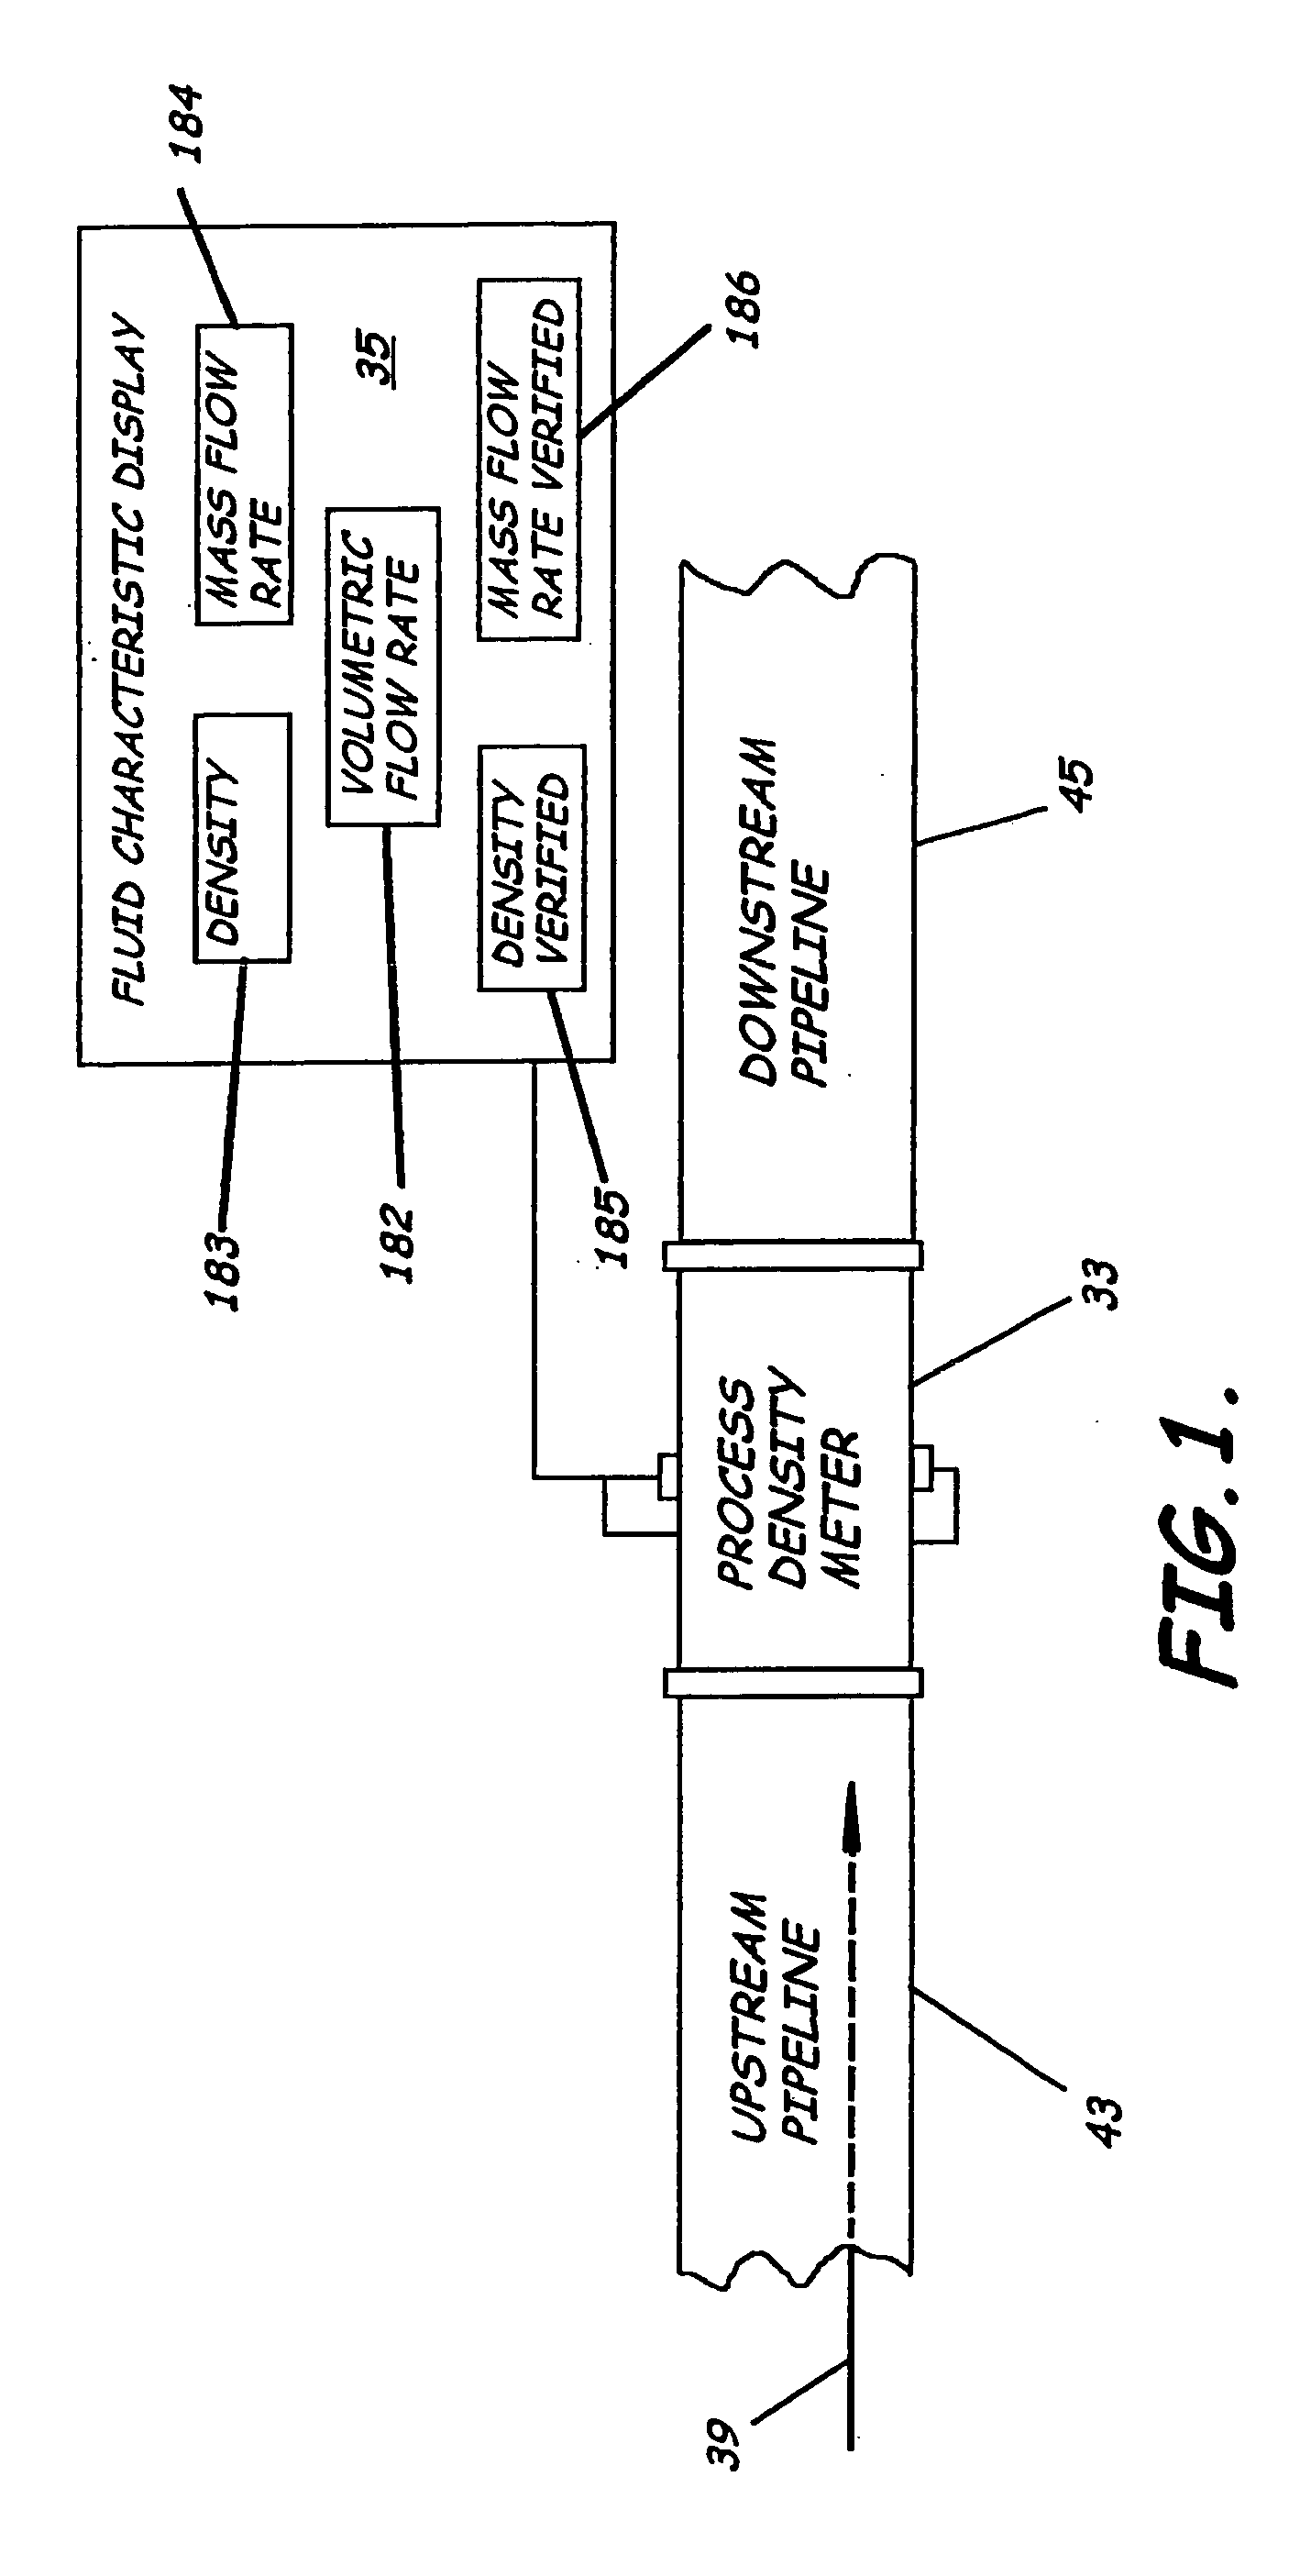 System to measure density, specific gravity, and flow rate of fluids, meter, and related methods